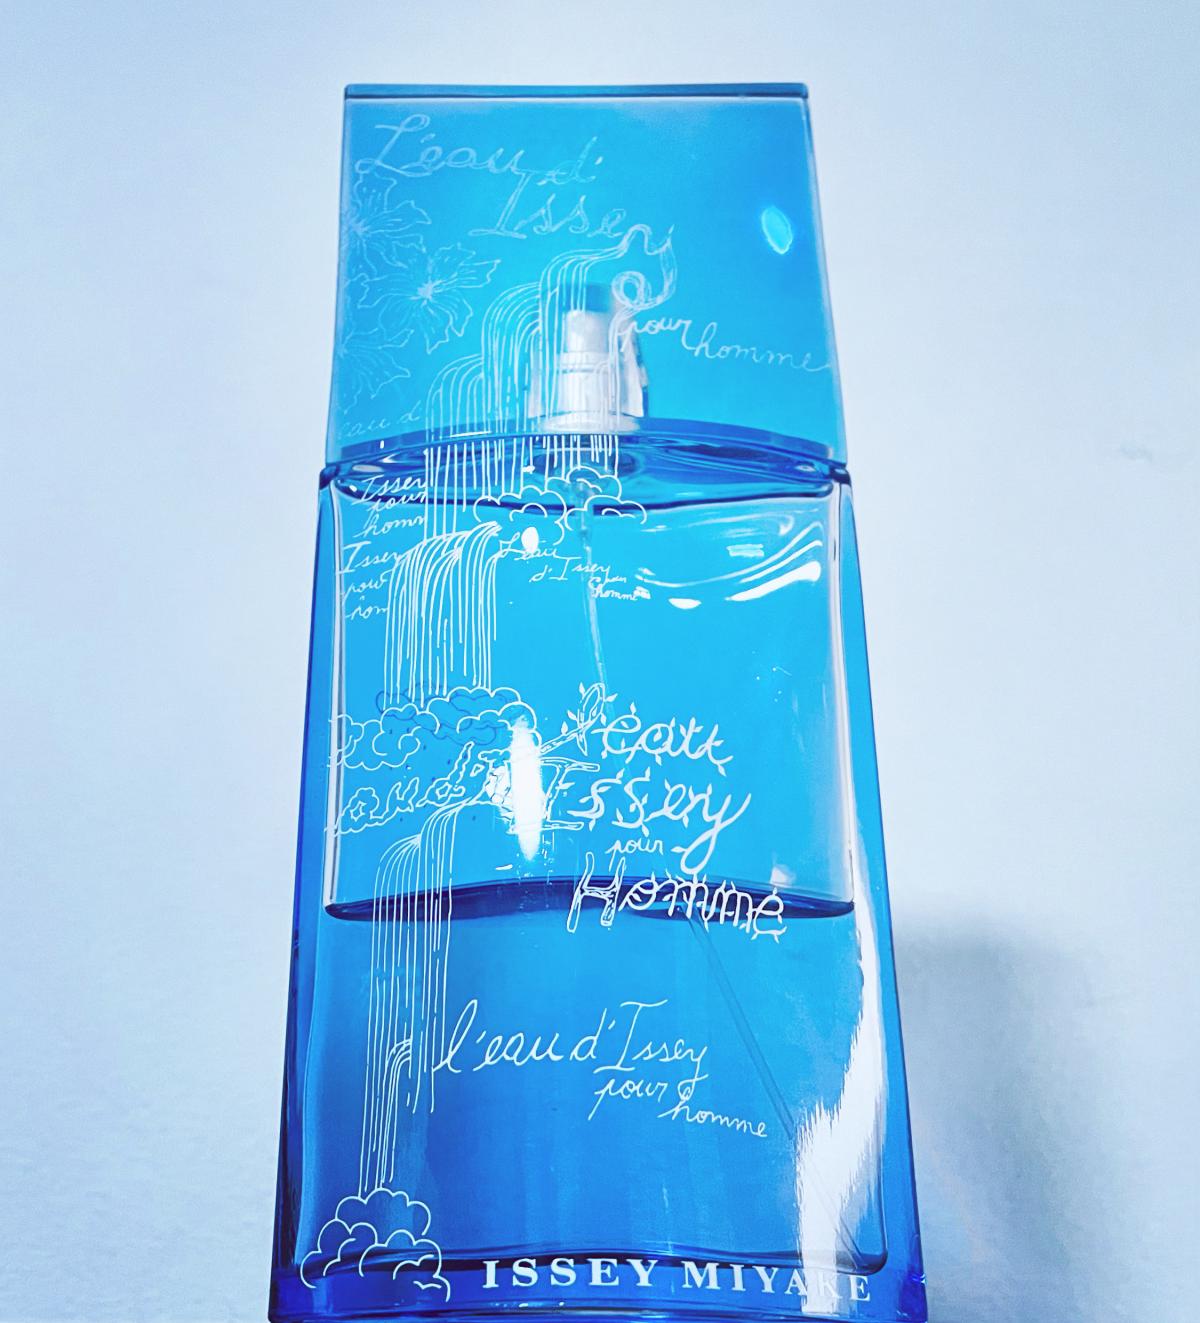 L&#039;Eau d&#039;Issey Summer Pour Homme 2008 Issey Miyake ماء  كولونيا - a fragrance للرجال 2008